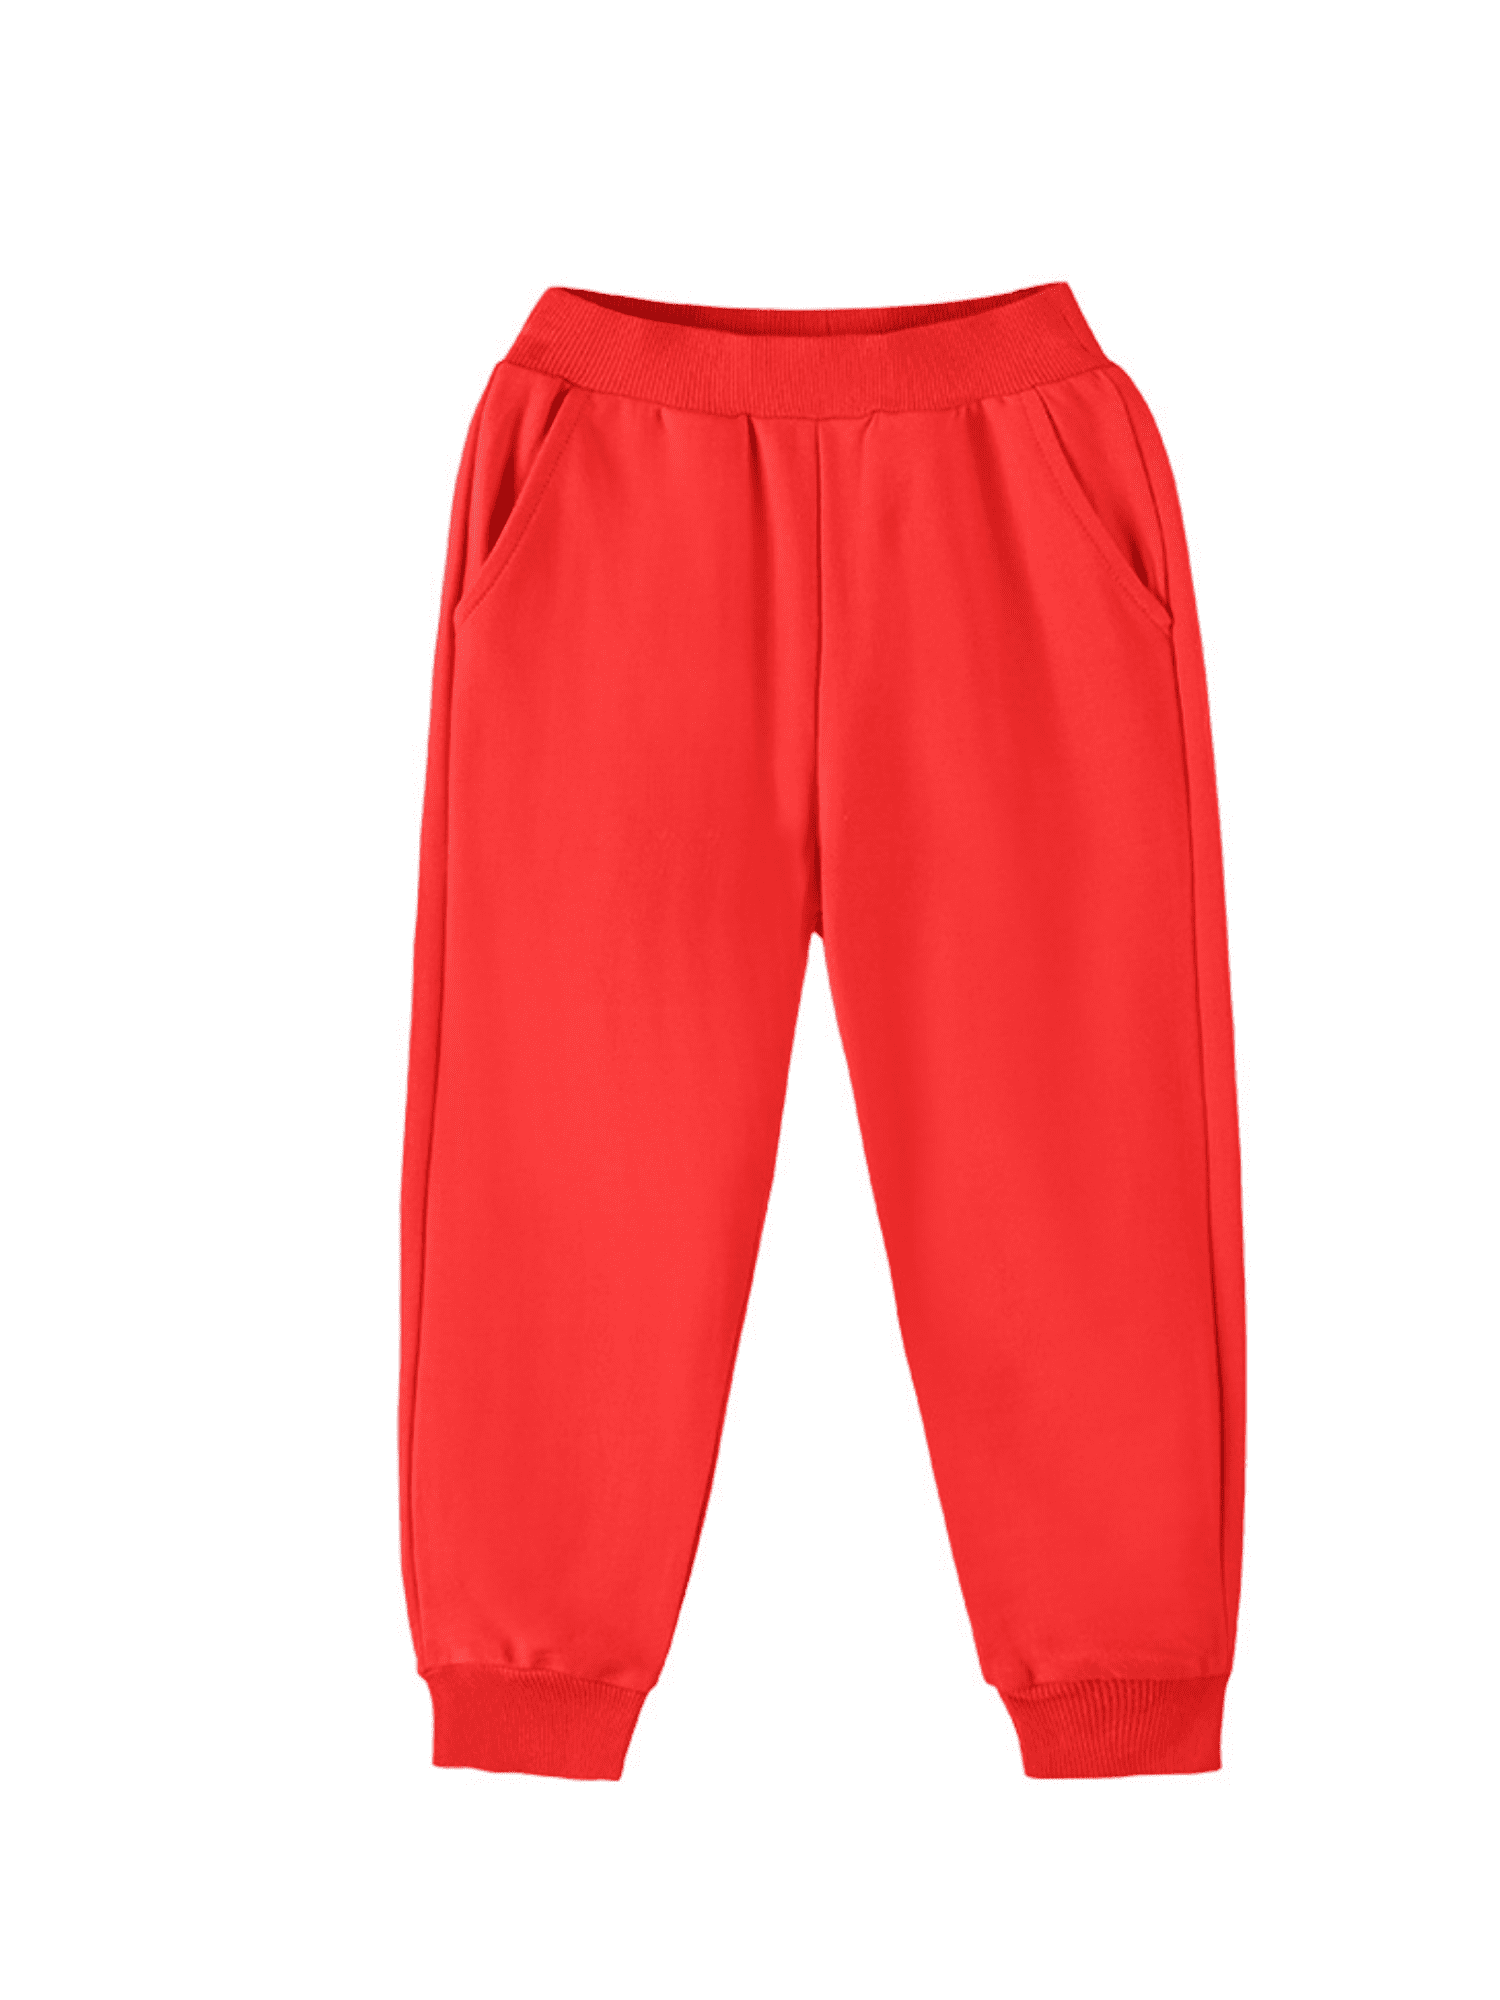 100% Cotton Sweatpants Unisex Boys Girls Casual Jogger Solid red Pants